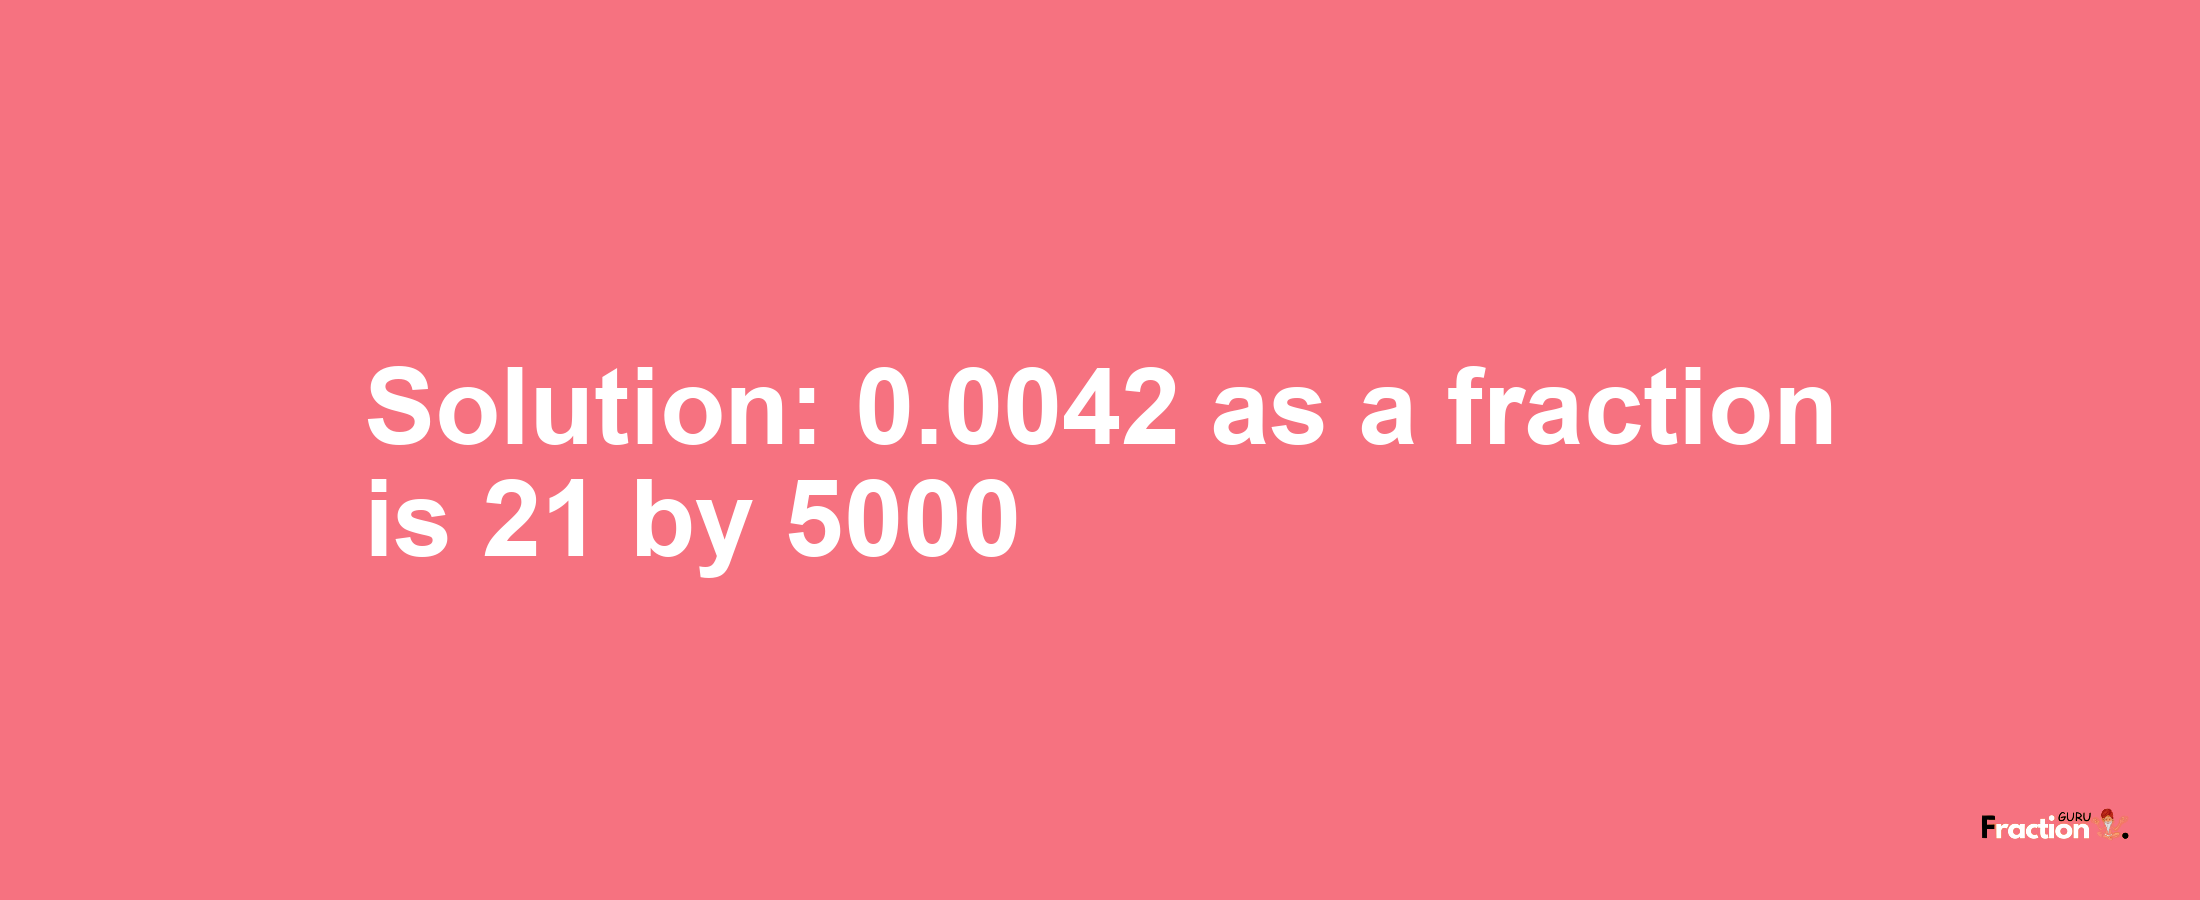 Solution:0.0042 as a fraction is 21/5000